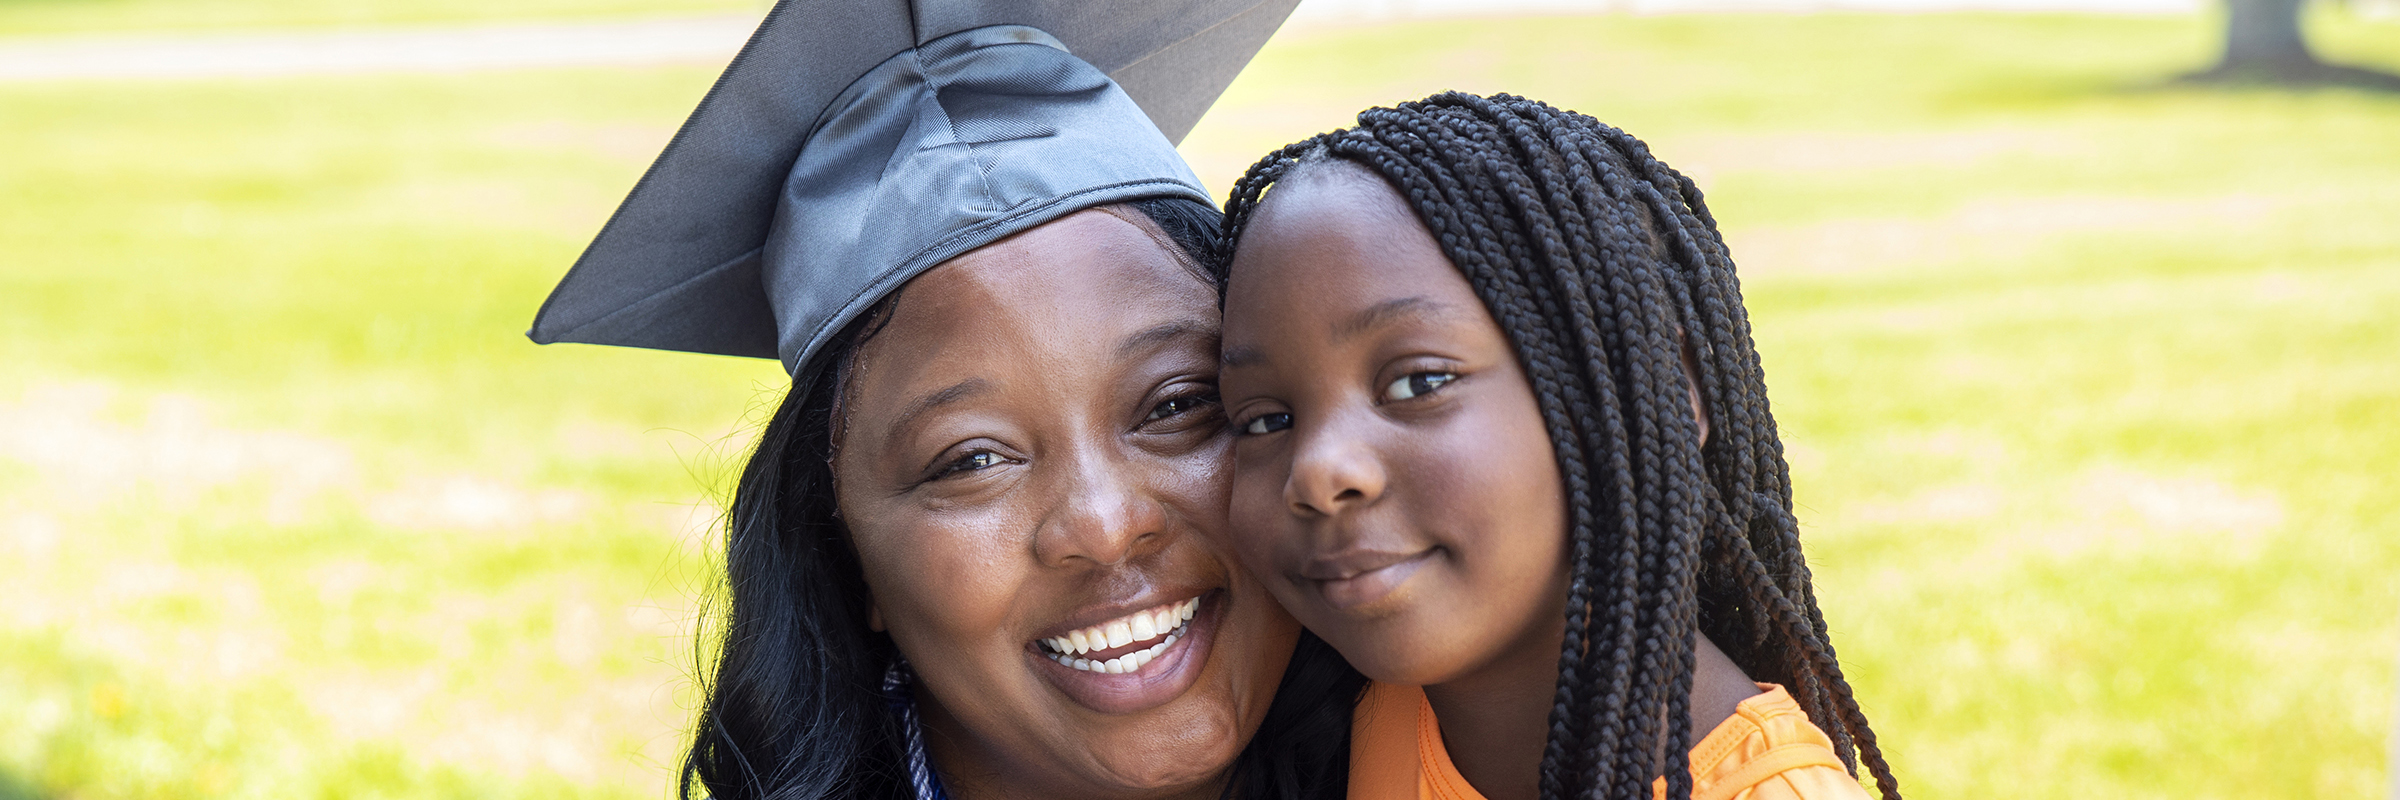 parent in mortarboard with child smiling